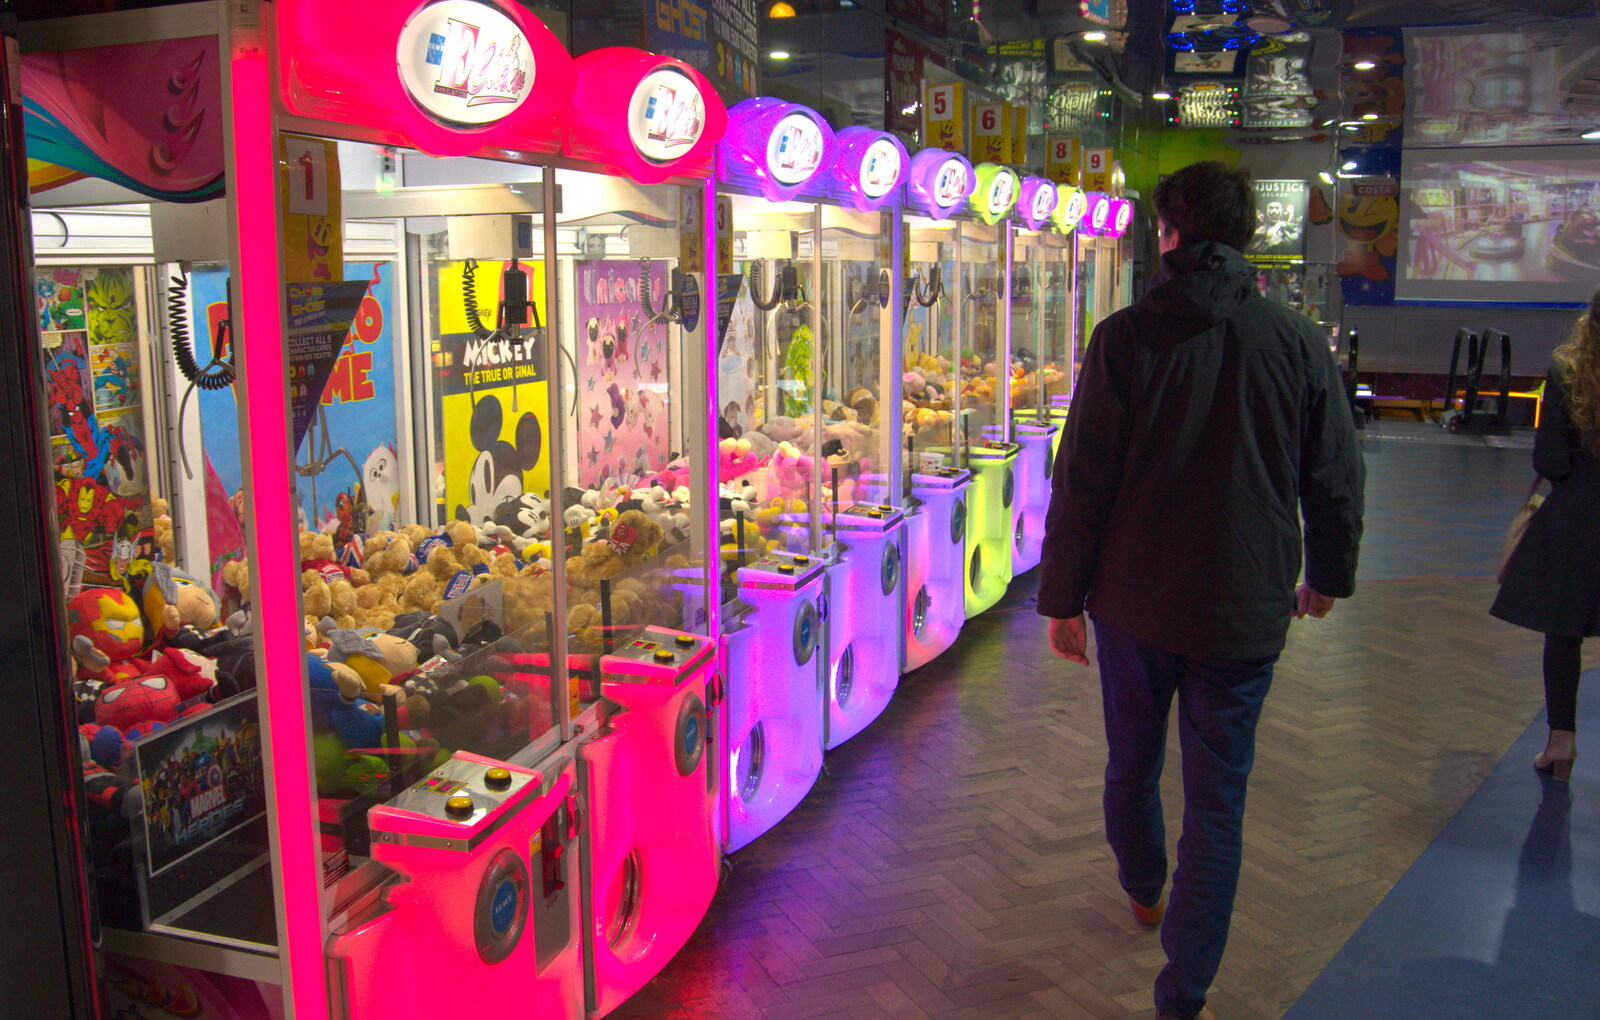 Ken wanders past a rank of claw machines from A Team Outing at Namco Funscape, South Bank, London - 27th March 2019